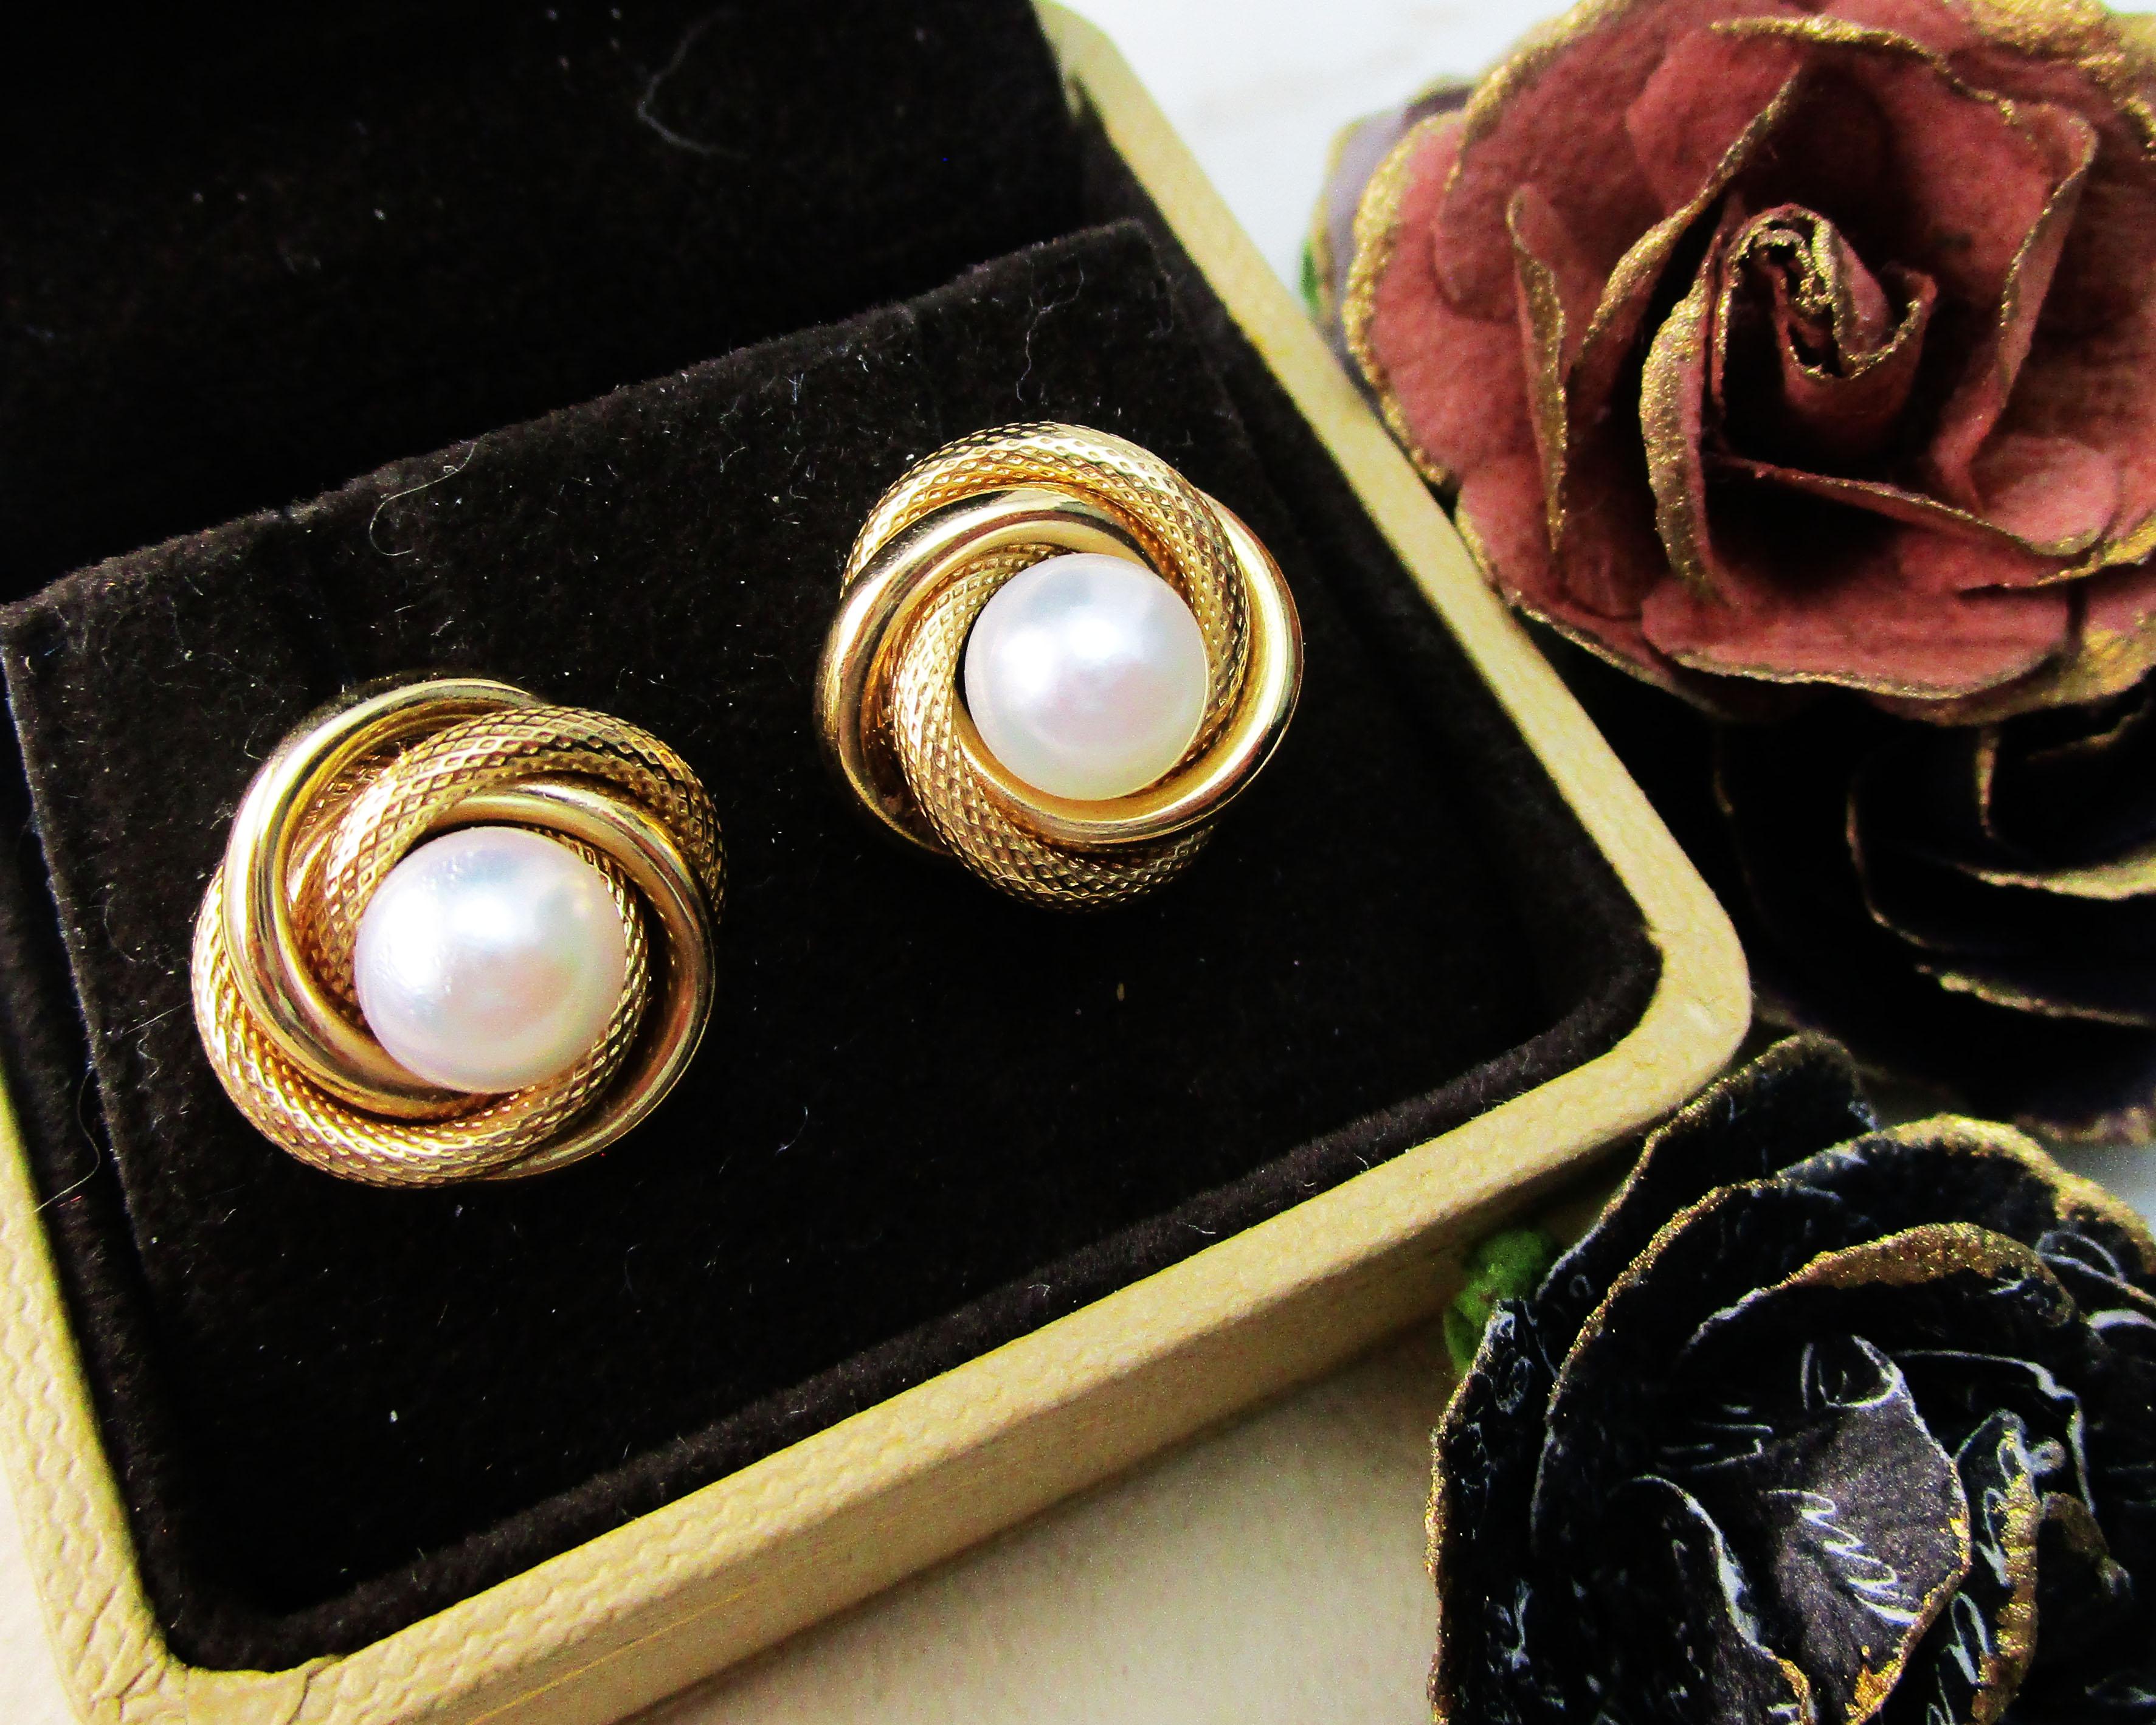 This is a gorgeous pair of stud earrings in 14k yellow gold featuring brilliant white pearl earrings and a braided love knot border of textured and smooth 14k gold! These are not your everyday pearl studs! They have the classic pearl center, but the